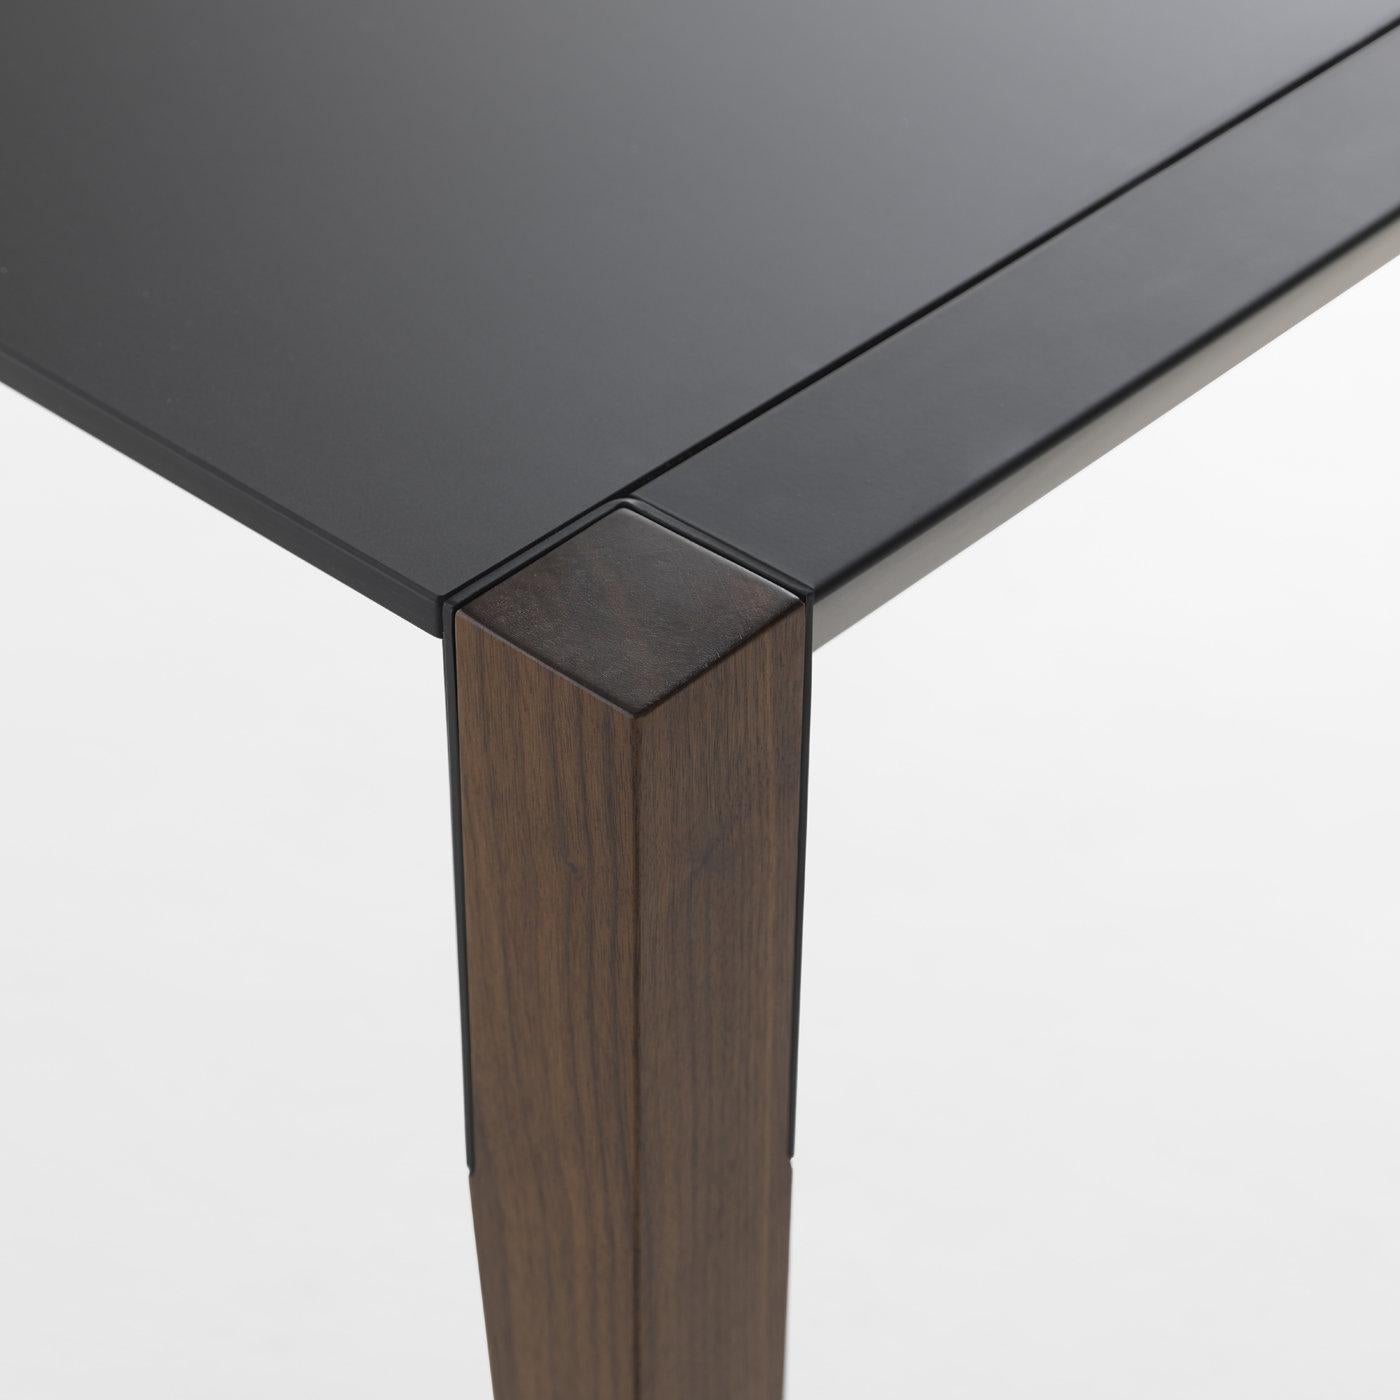 Wood Tango Extendable Table by Joe Doucet and Renato Zamberlan For Sale